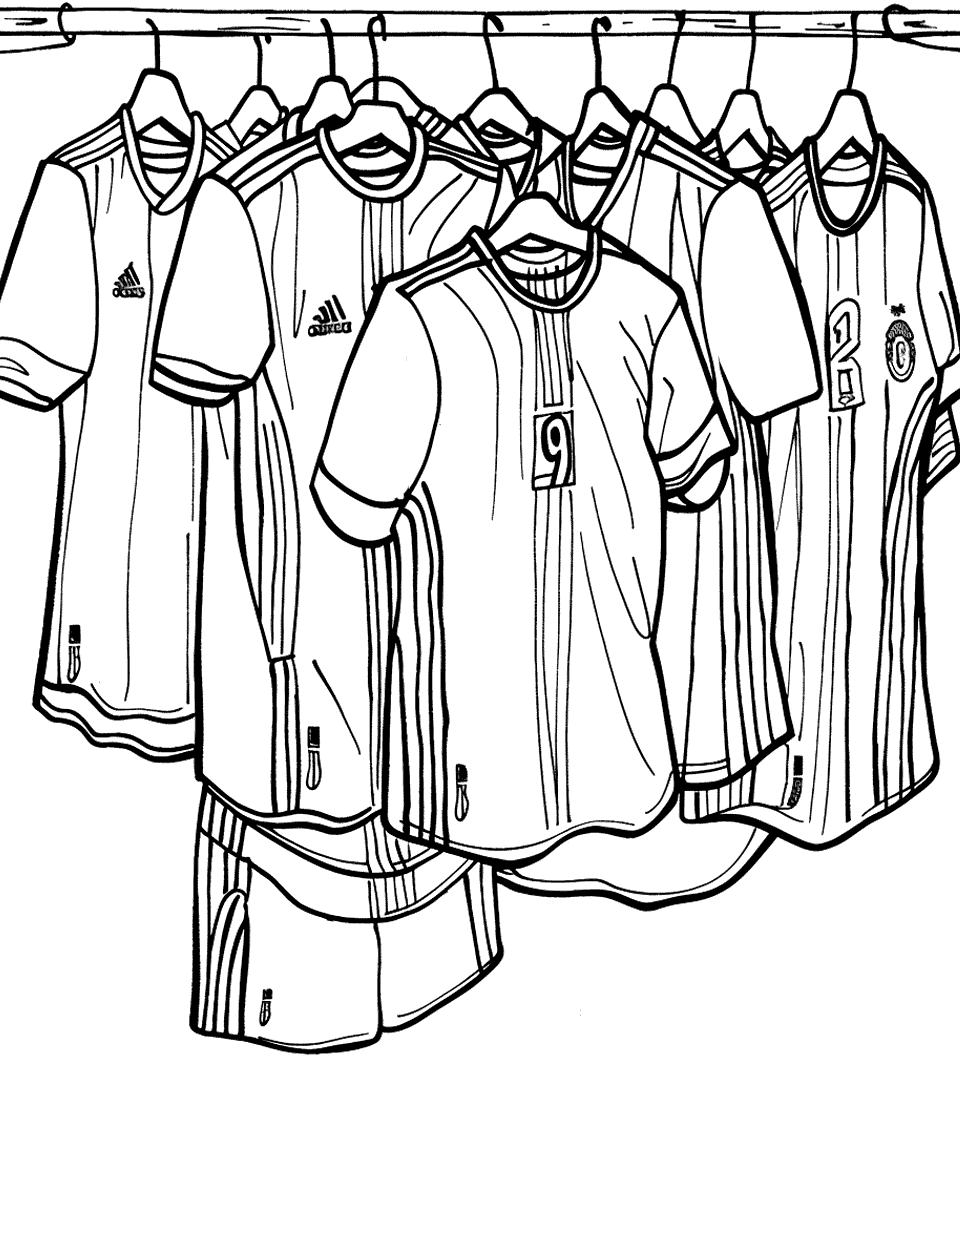 Soccer Jersey Collection Coloring Page - A wall displaying a collection of soccer jerseys.